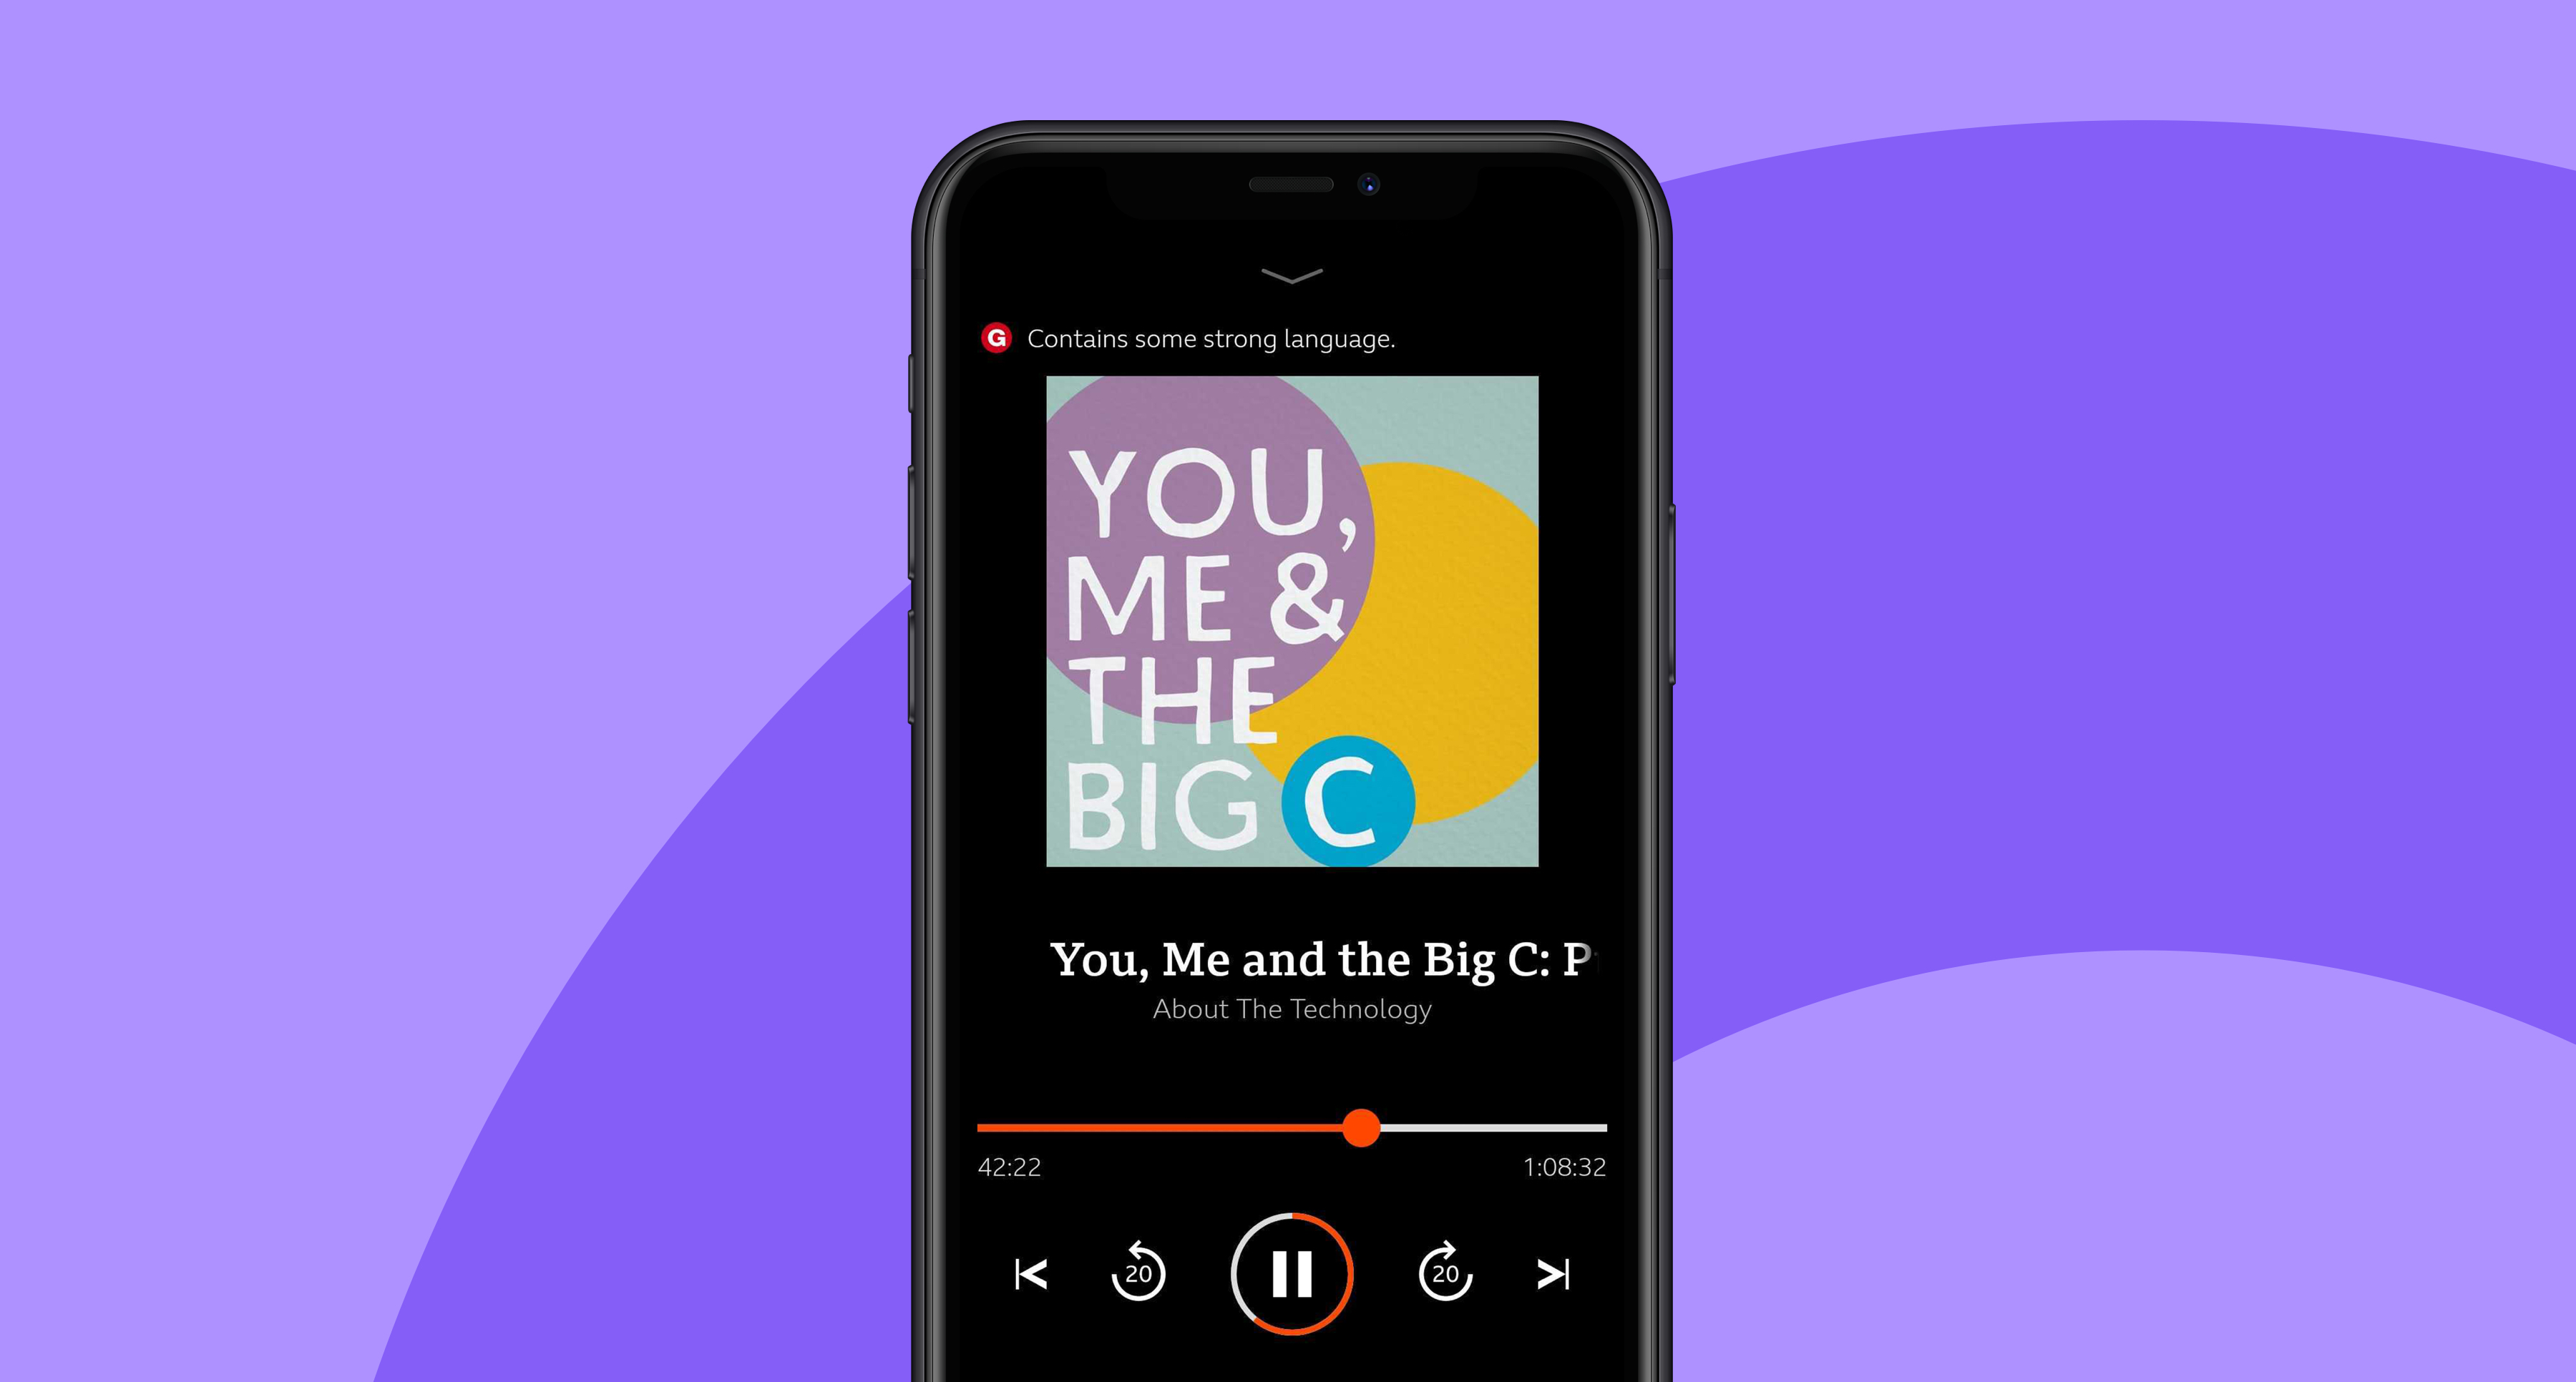 Careology on the You, Me & The Big C Podcast